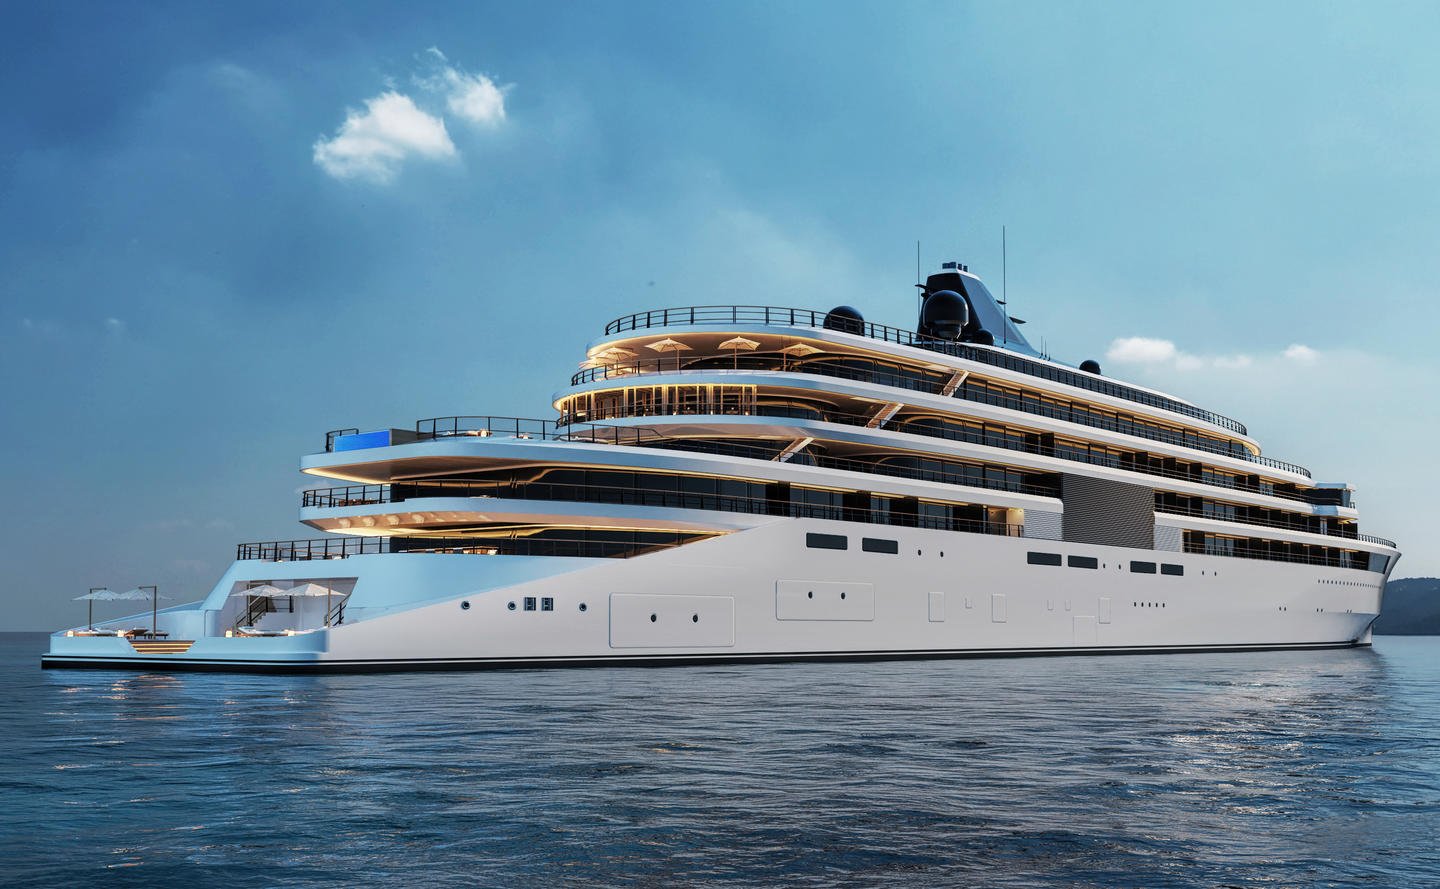 T. Mariotti and Neptune have signed a contract to launch ‘Project Sama’, the first vessel for the Aman Luxury Brand (Image at LateCruiseNews.com - January 2023)